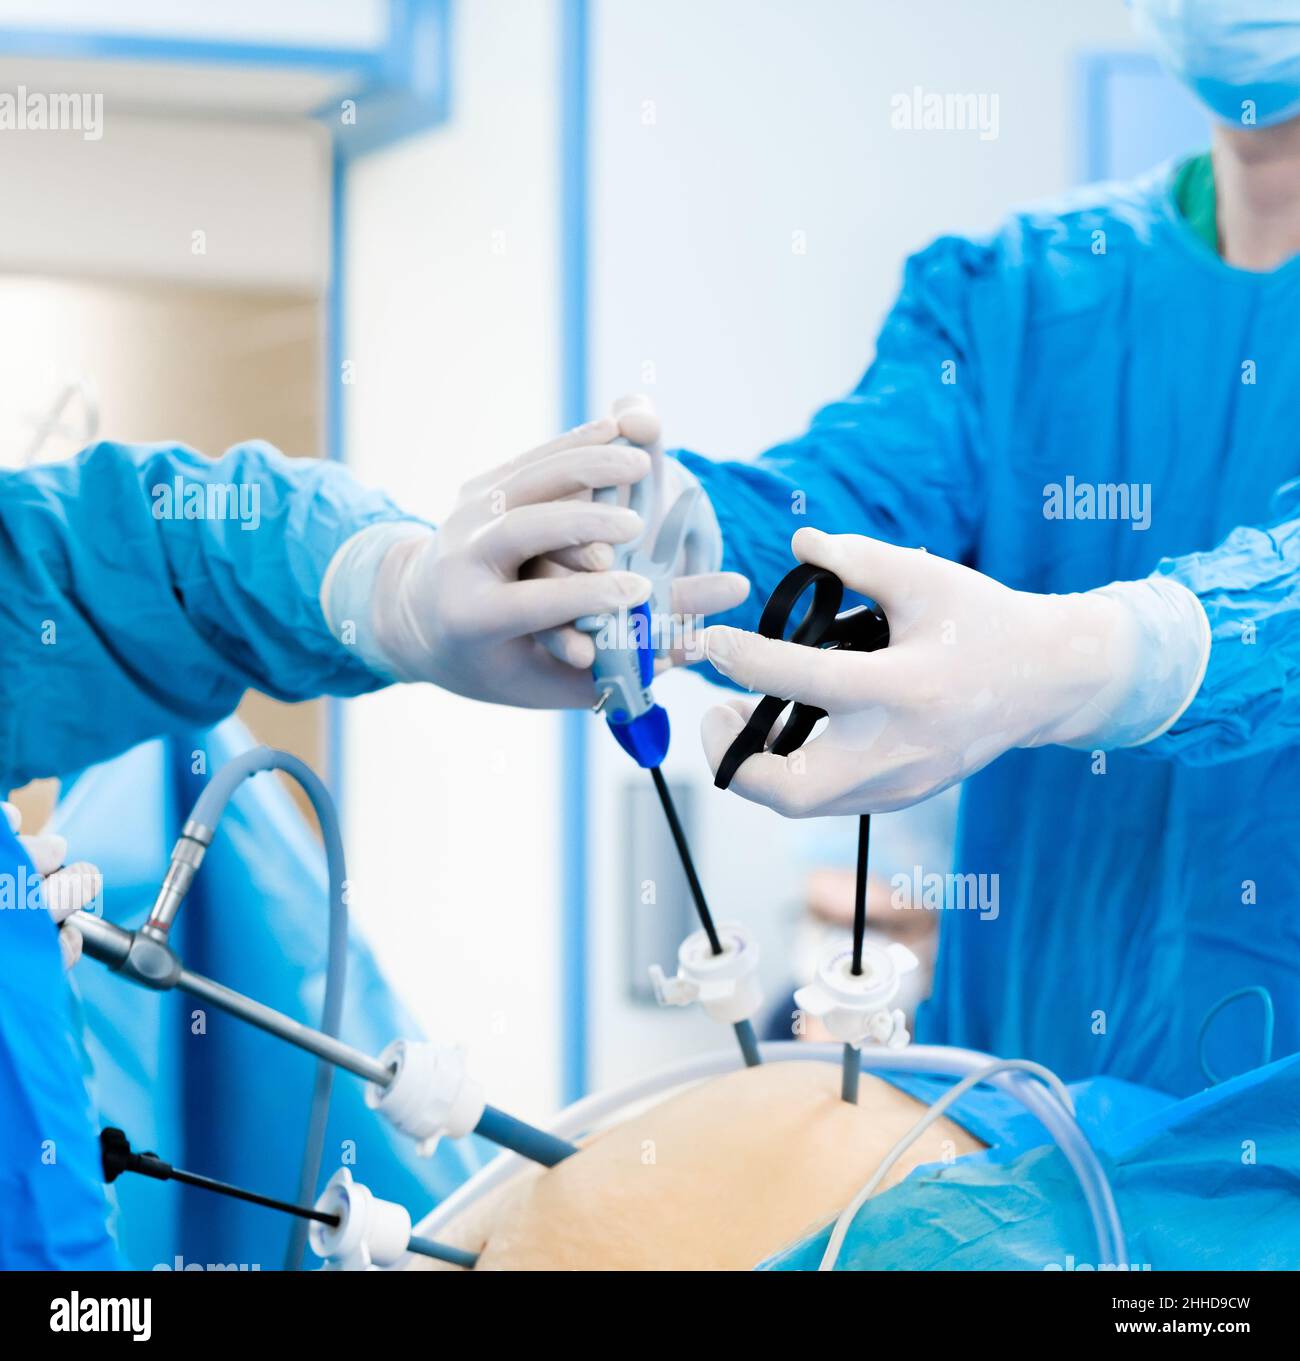 Abdominal surgery operation process using laparoscopic equipment. Selective focus. Hands of surgeons with surgical equipment. Surgical treatment of proctological diseases. Stock Photo